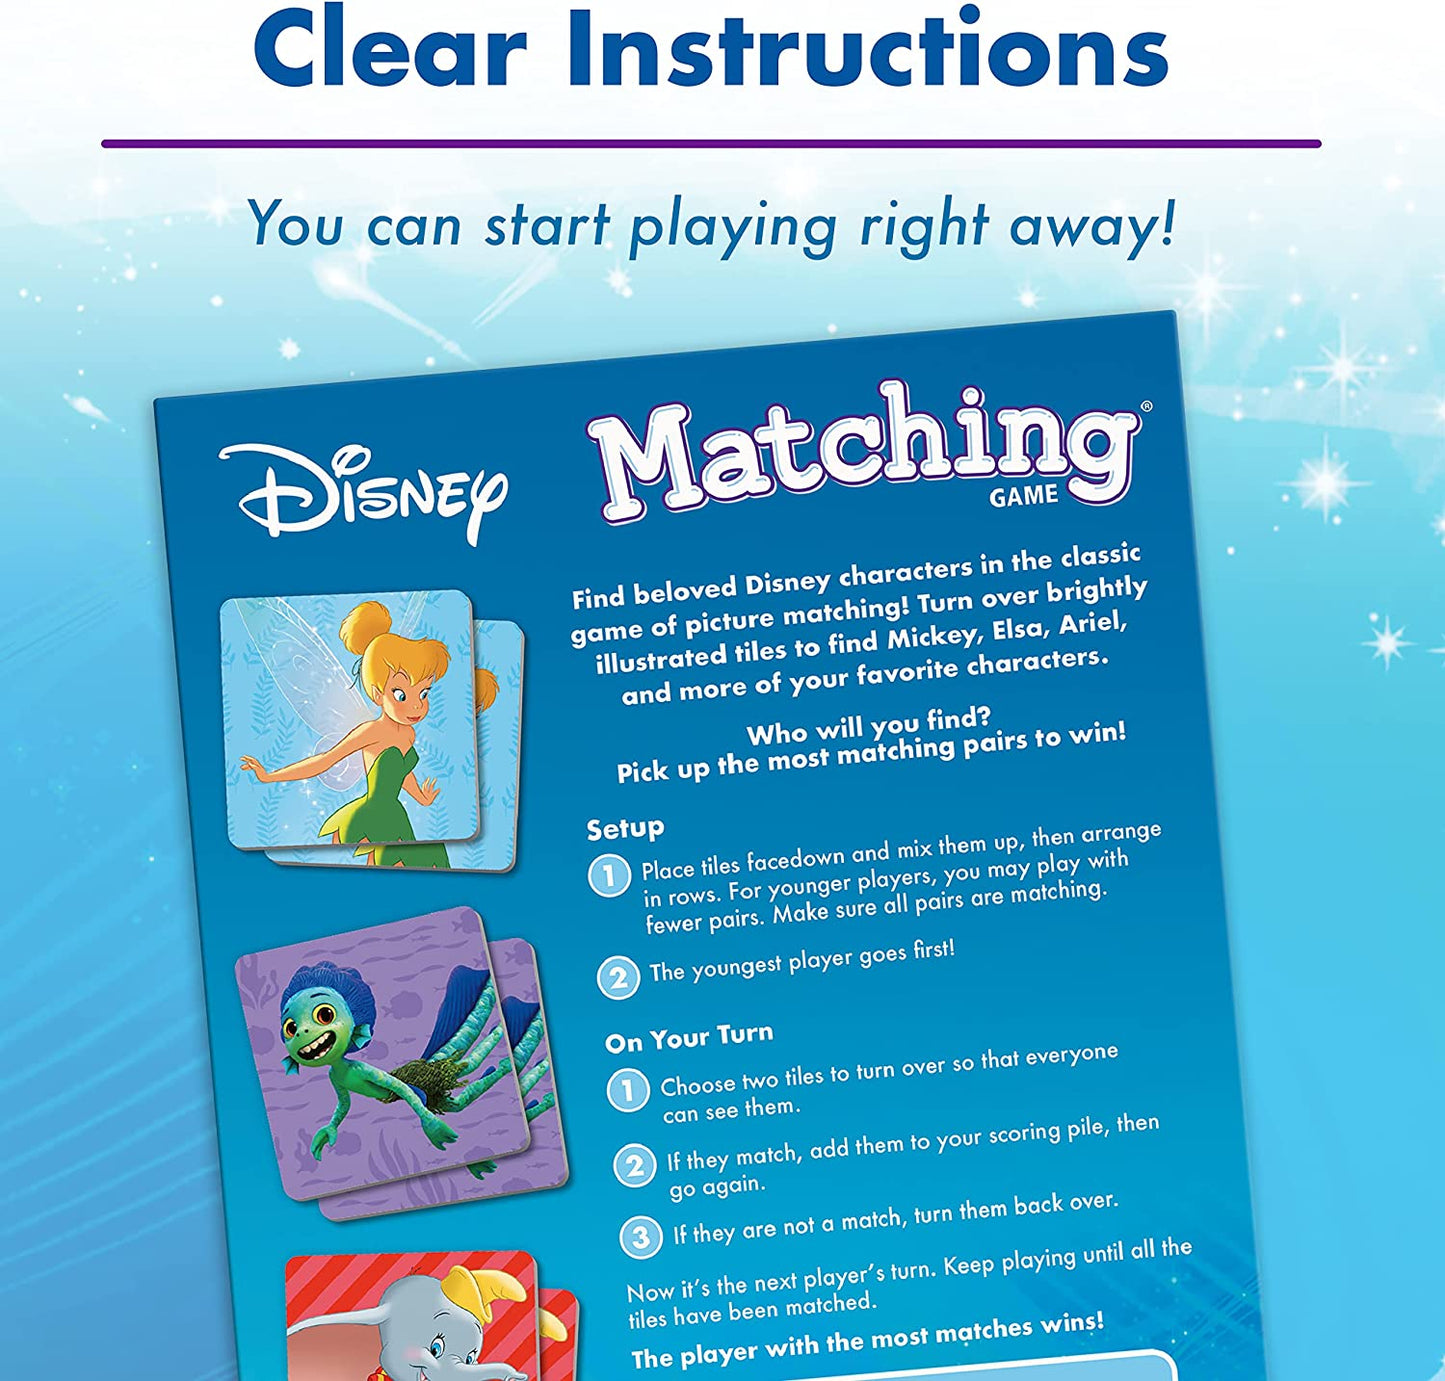 Disney Classic Characters Matching Game by Wonder Forge | A Fun & Fast Disney Memory Game for Kids | Mickey Mouse, Minnie Mouse, Donald Duck, and more , Blue